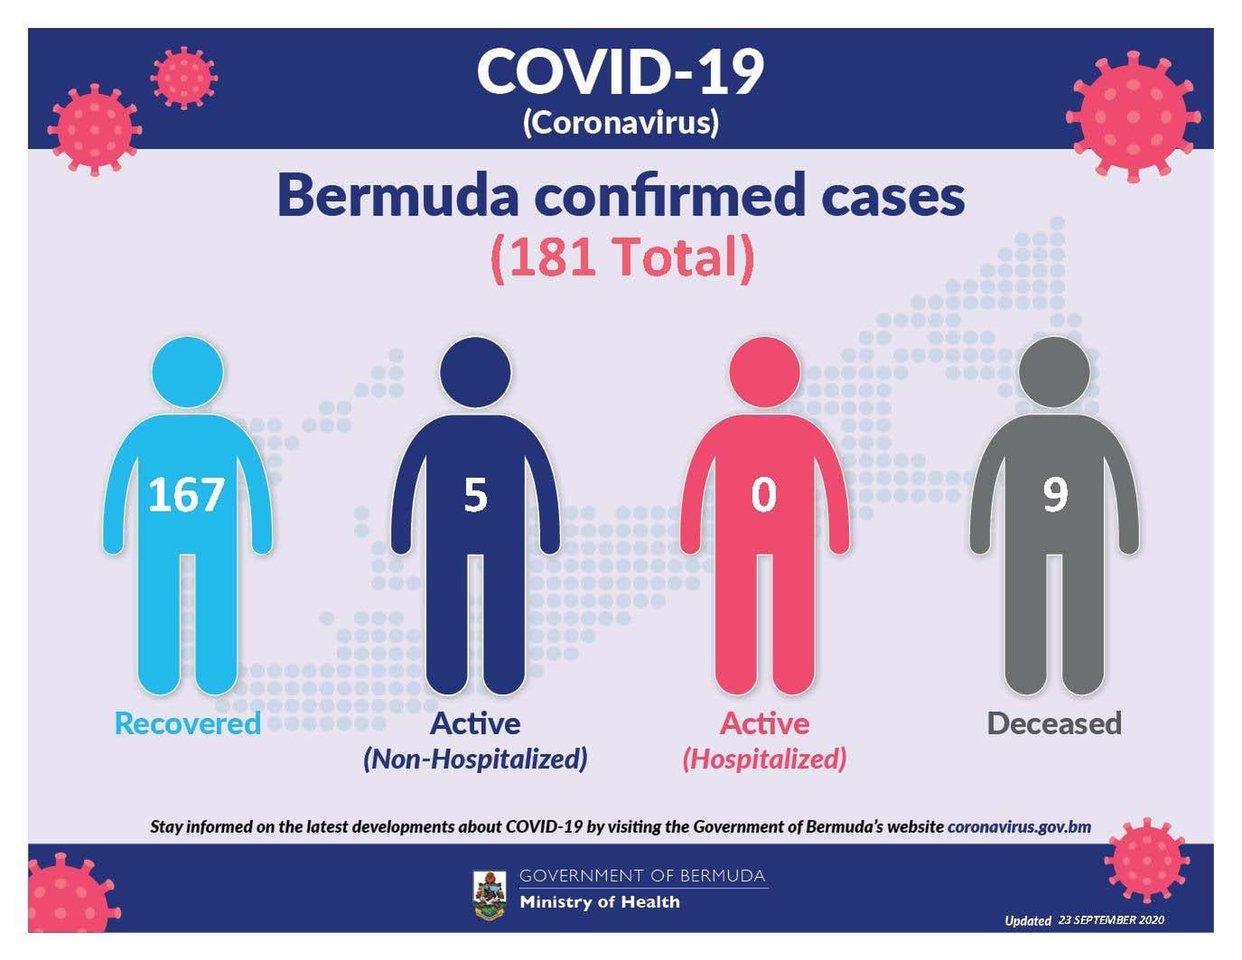 No new COVID-19 cases reported in Bermuda, 28 September